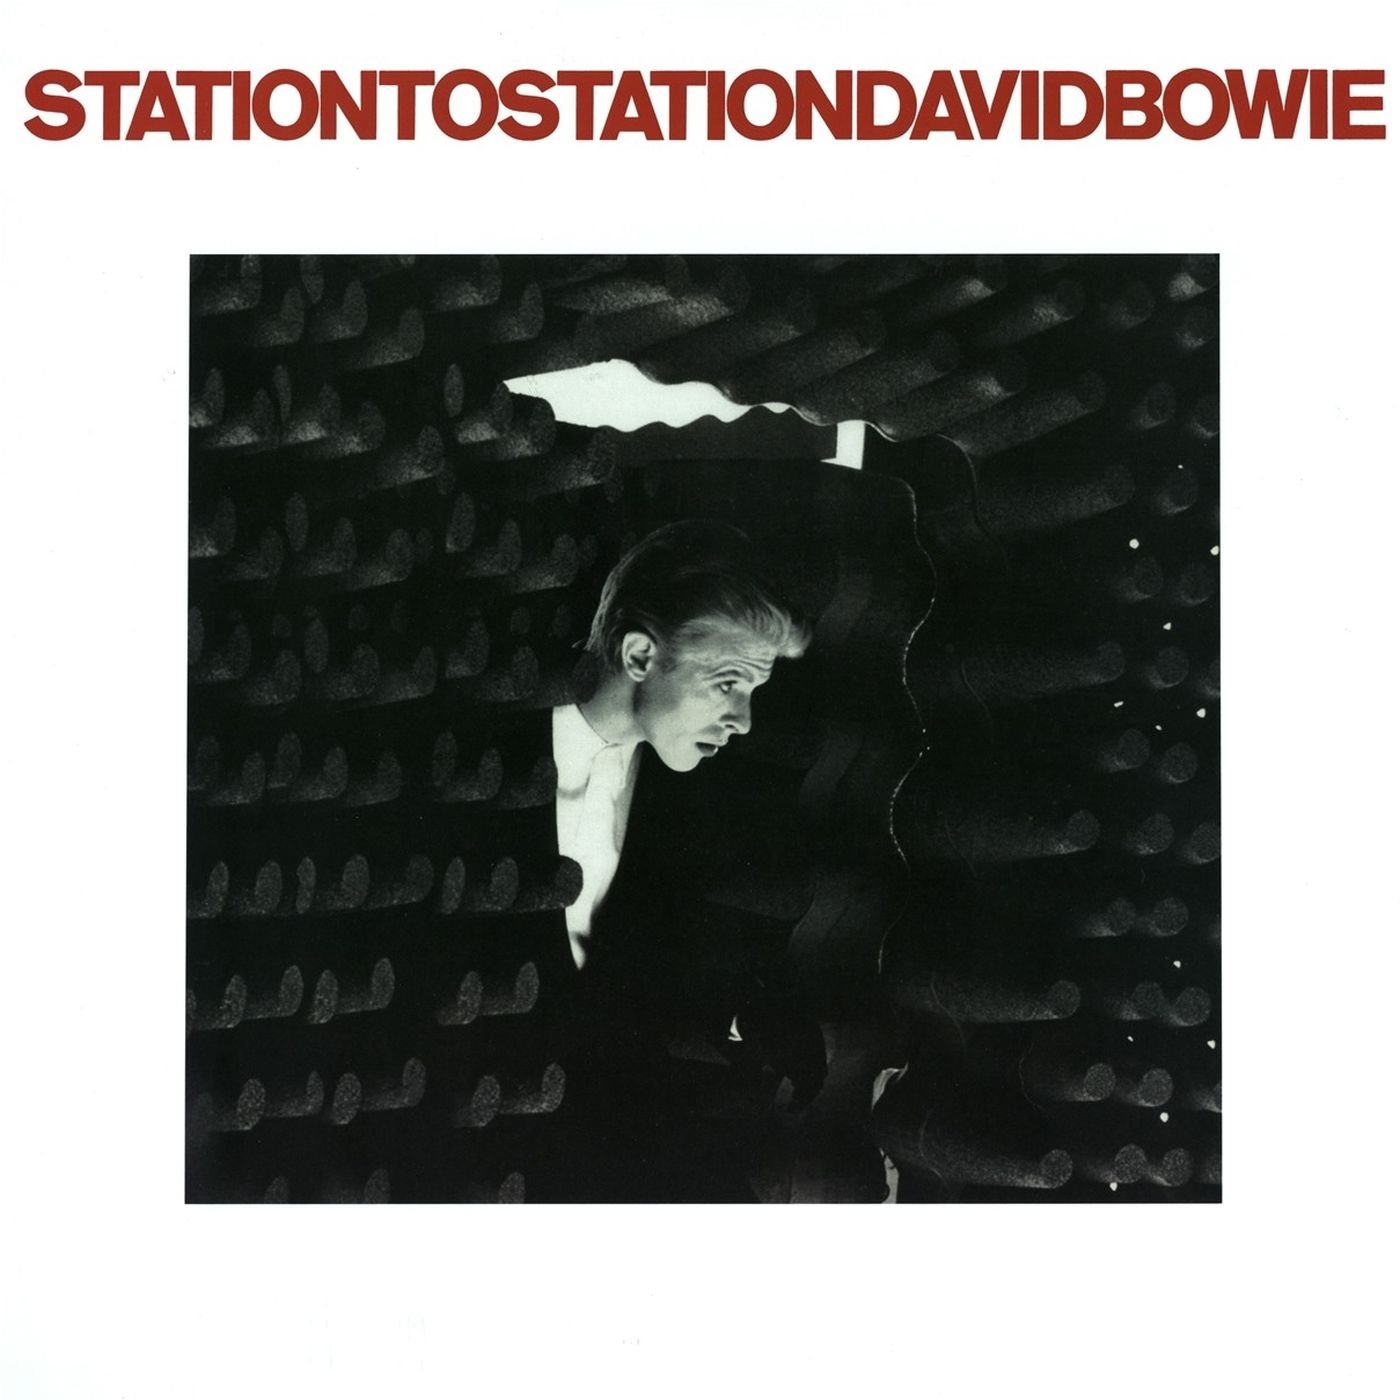 David Bowie "Station to Station" LP